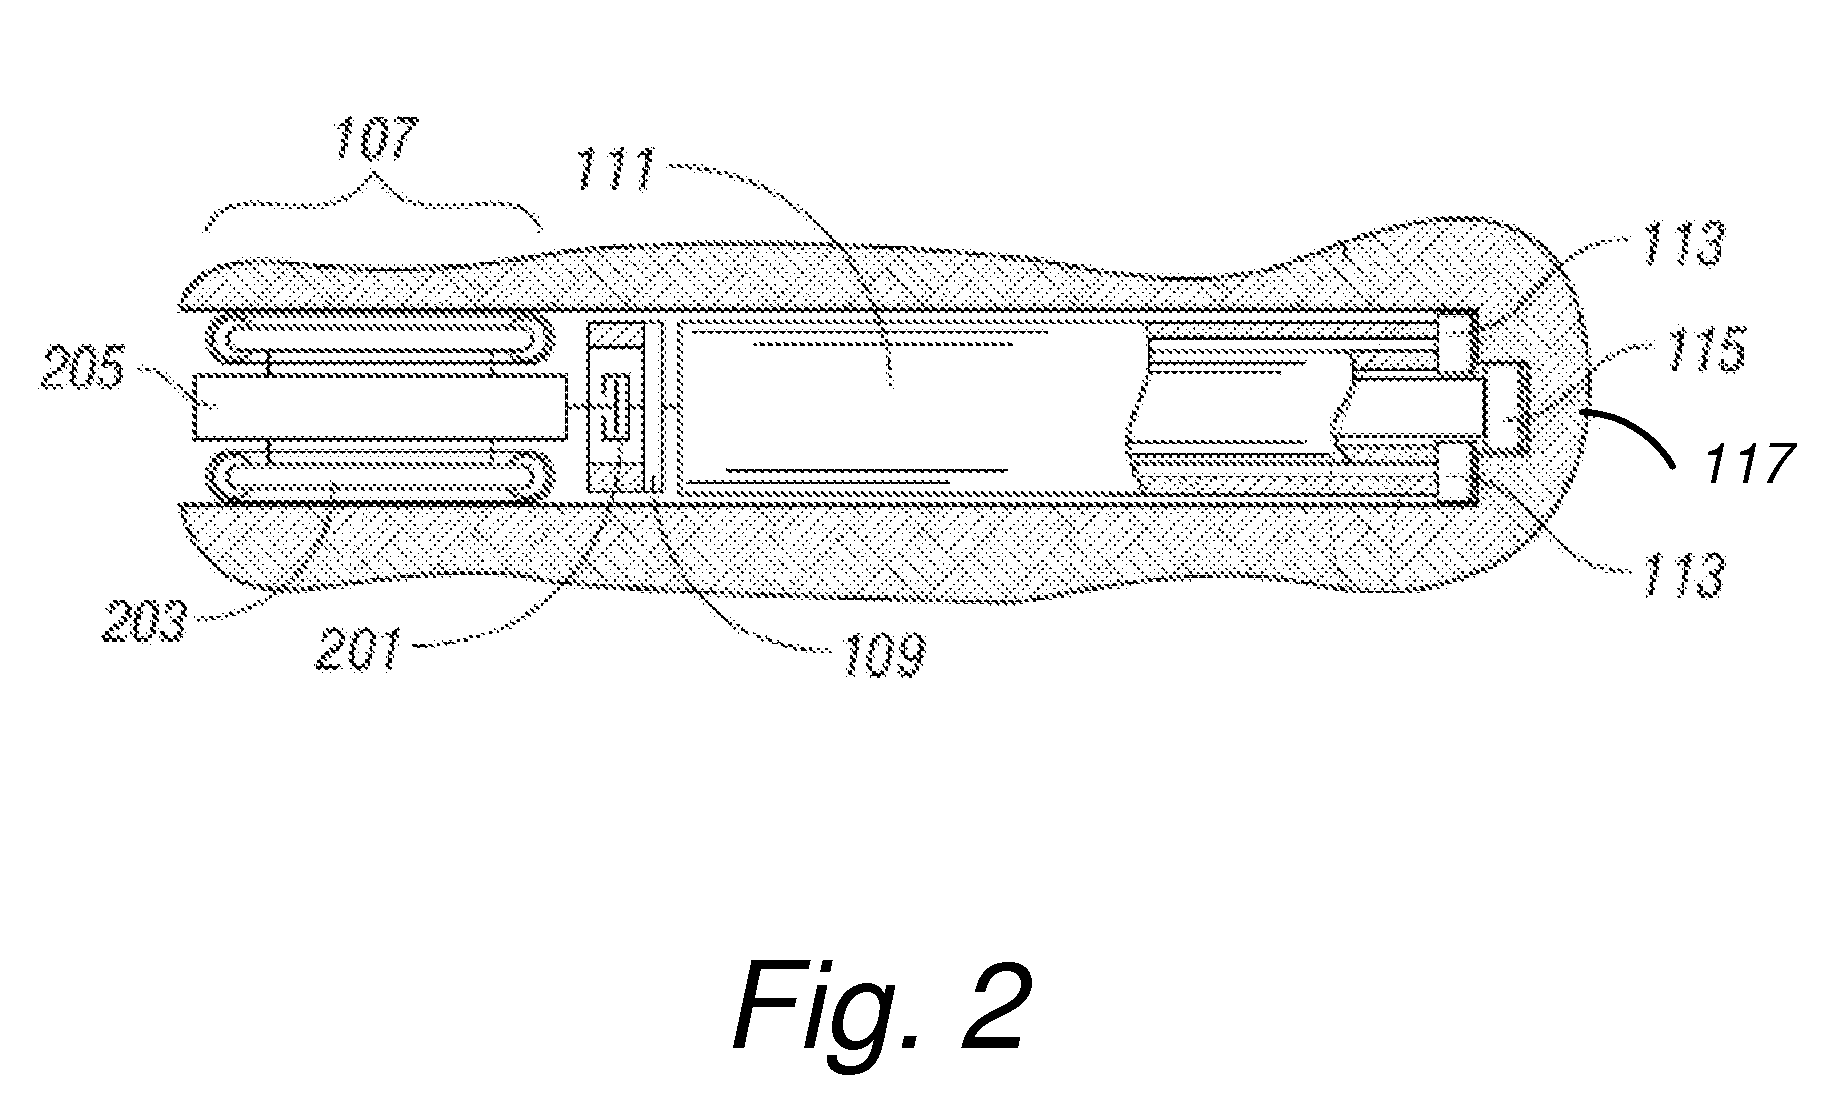 Apparatus for eliminating net drill bit torque and controlling drill bit walk